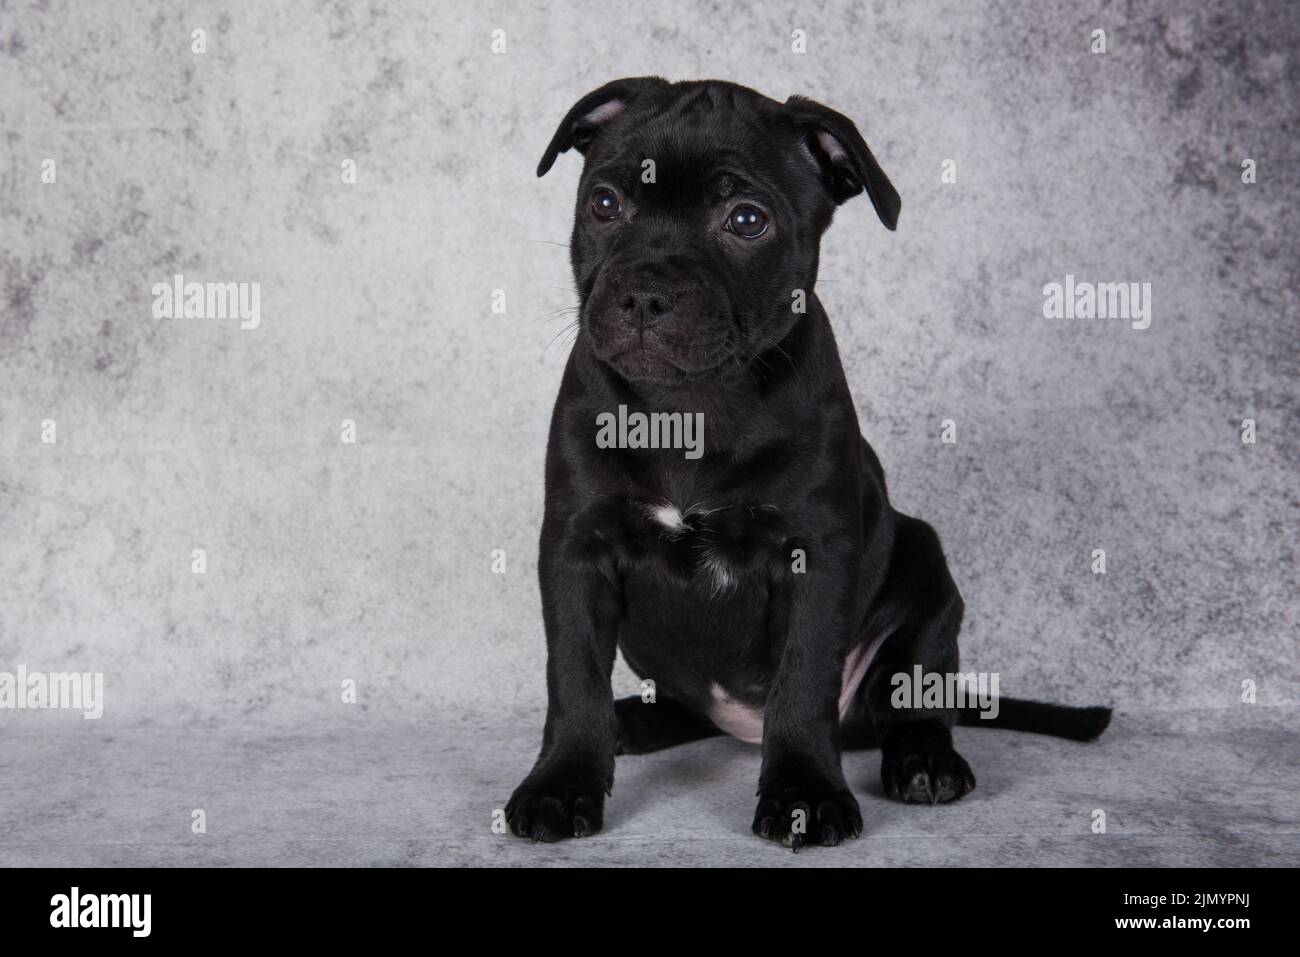 Black female American Staffordshire Bull Terrier dog puppy on gray background Stock Photo